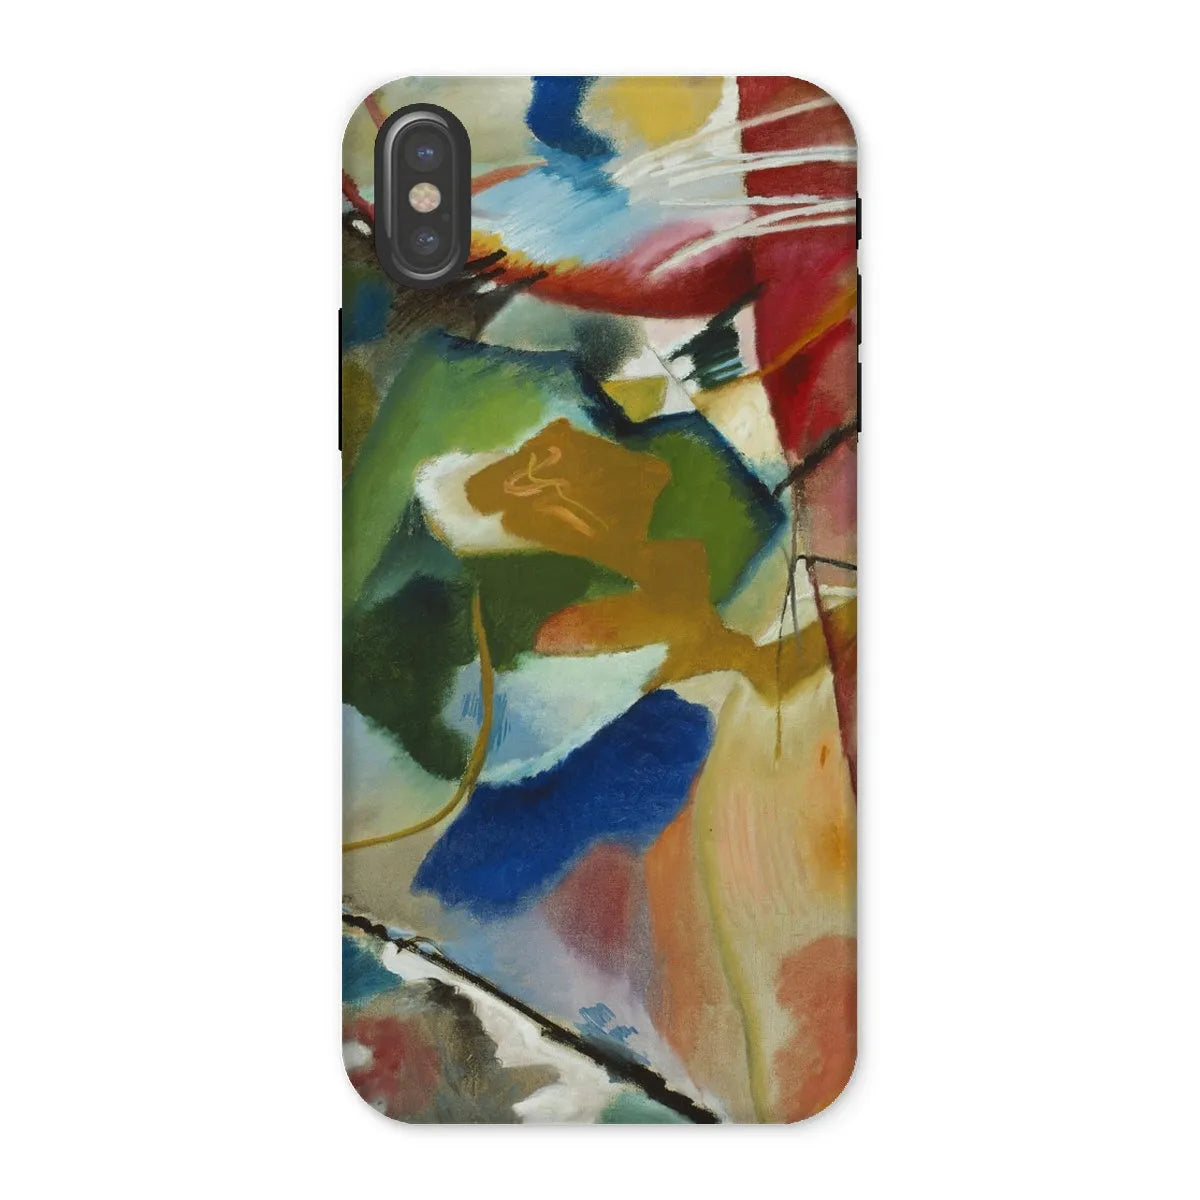 Painting With Green Center Art Phone Case - Wassily Kandinsky - Iphone x / Matte - Mobile Phone Cases - Aesthetic Art